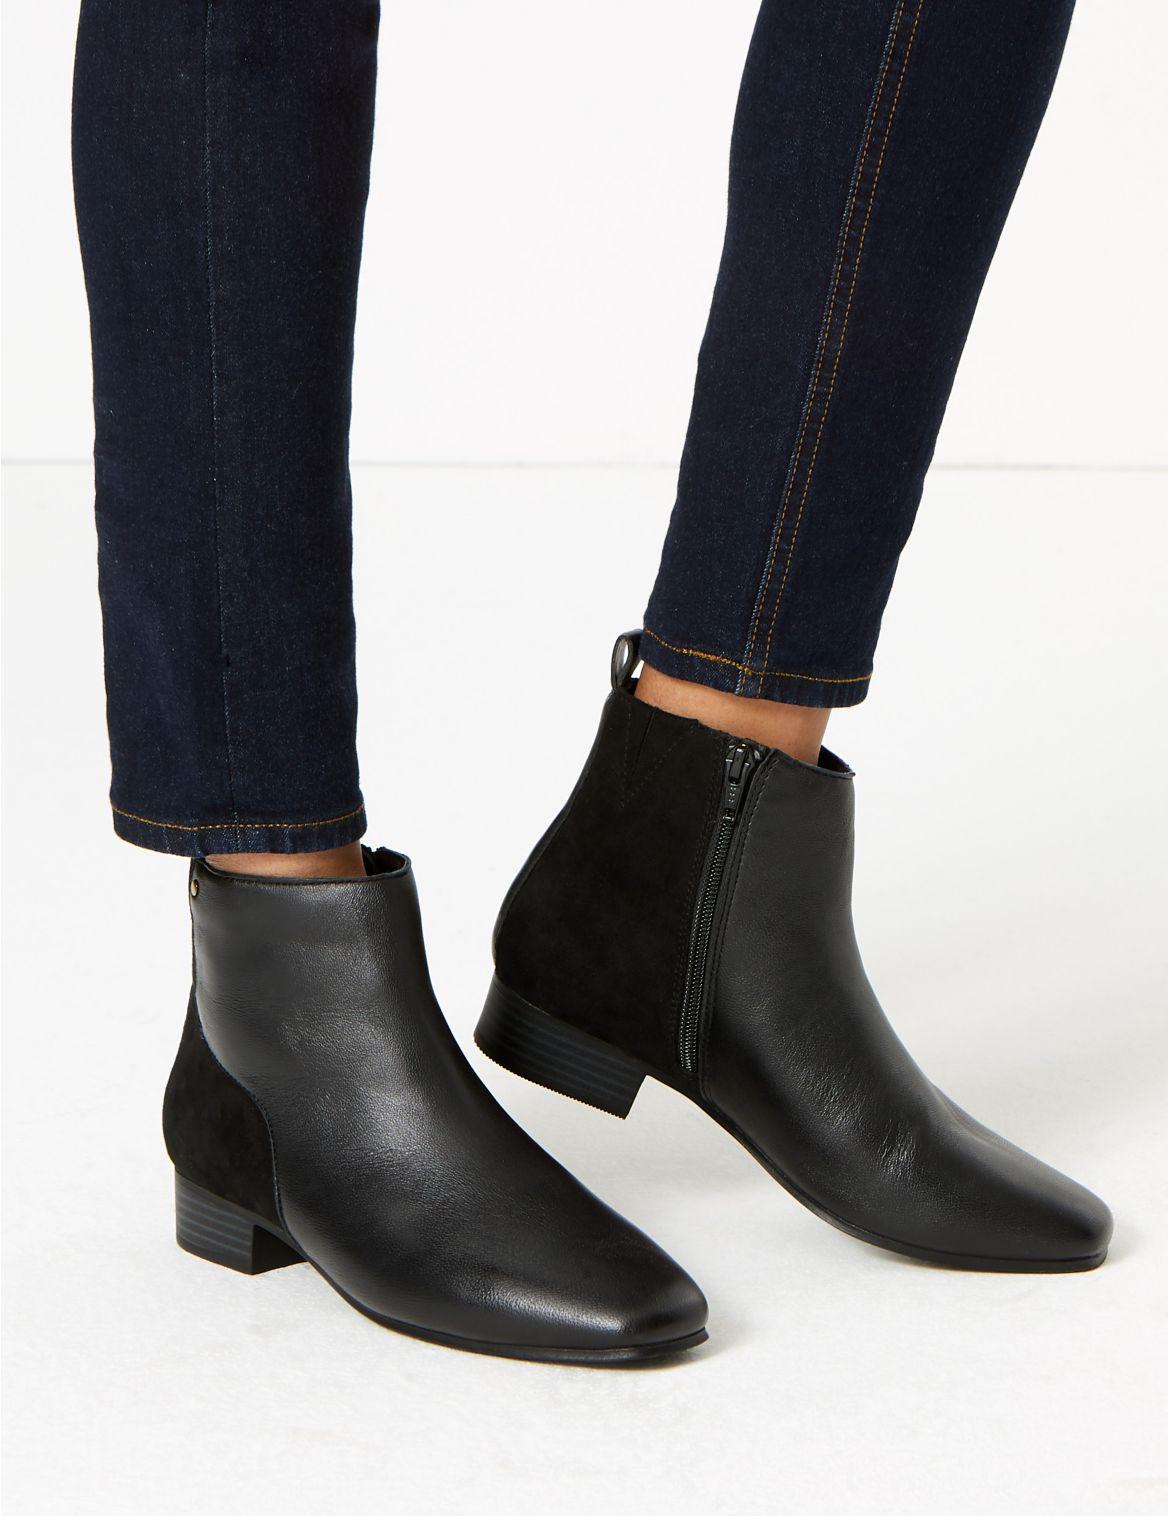 Marks & Spencer Leather & Suede Square Toe Ankle Boots in Black - Lyst